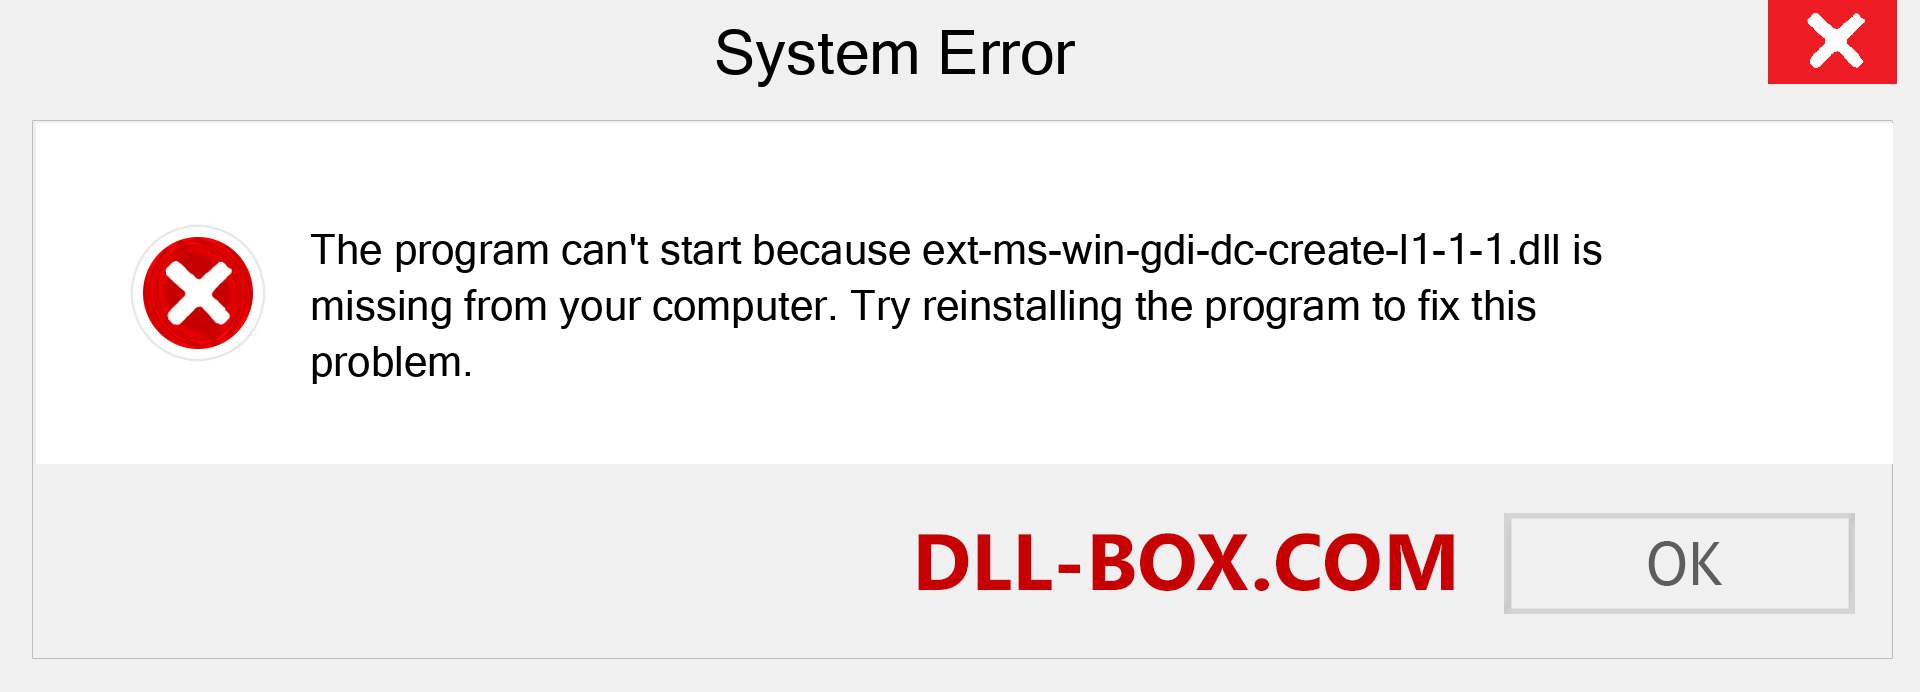  ext-ms-win-gdi-dc-create-l1-1-1.dll file is missing?. Download for Windows 7, 8, 10 - Fix  ext-ms-win-gdi-dc-create-l1-1-1 dll Missing Error on Windows, photos, images